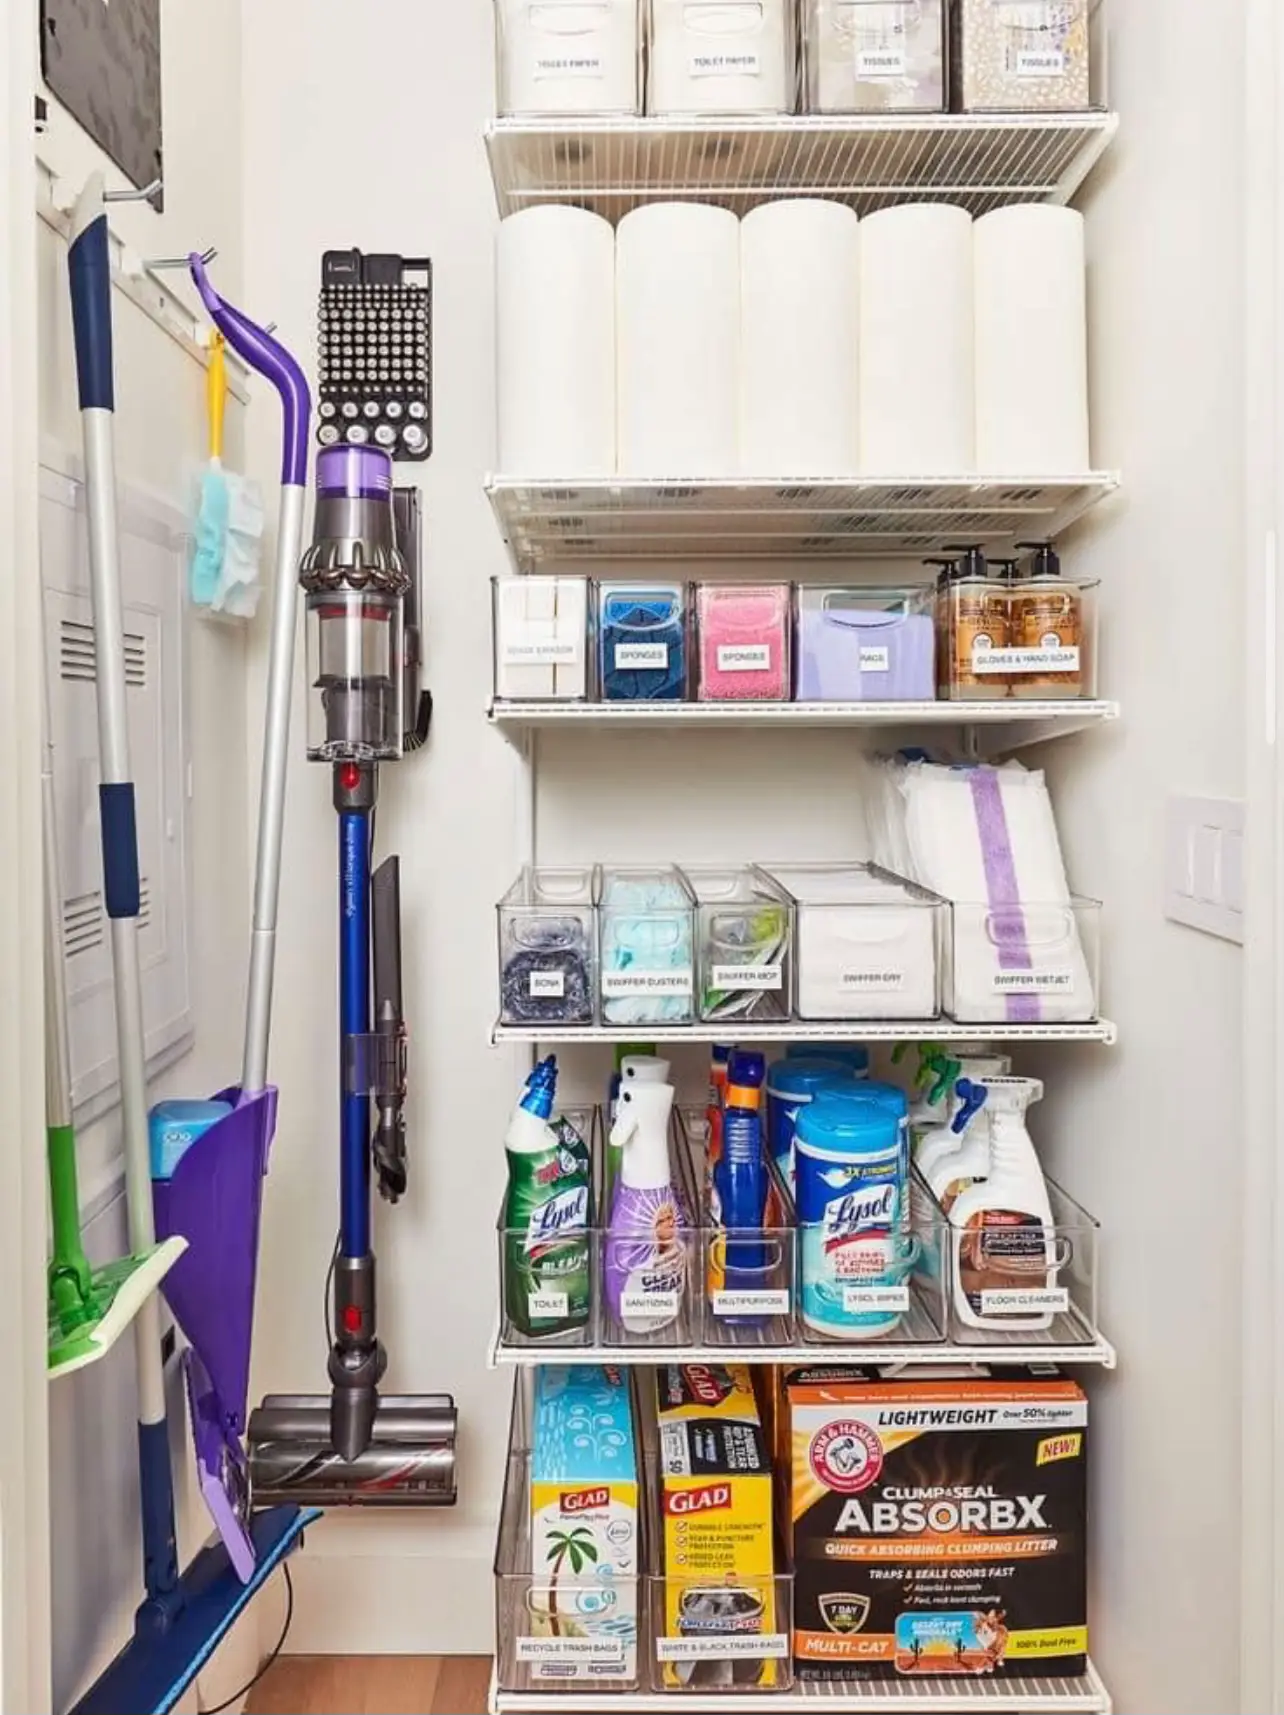  A refrigerator with a vacuum and cleaning supplies inside.